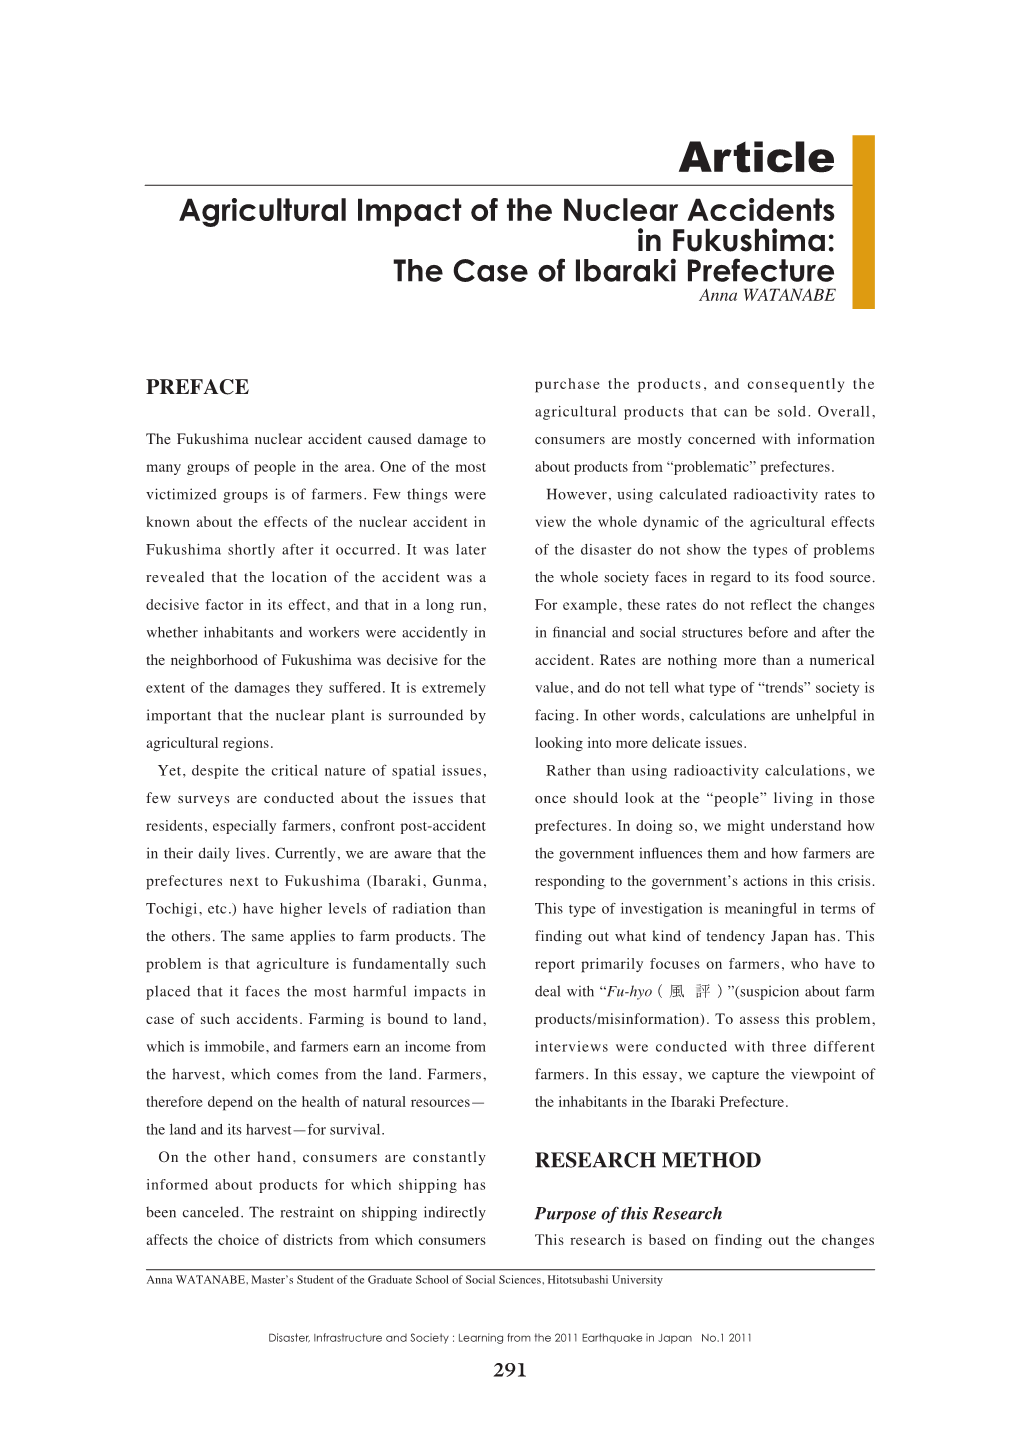 Agricultural Impact of the Nuclear Accidents in Fukushima: the Case of Ibaraki Prefecture Anna WATANABE